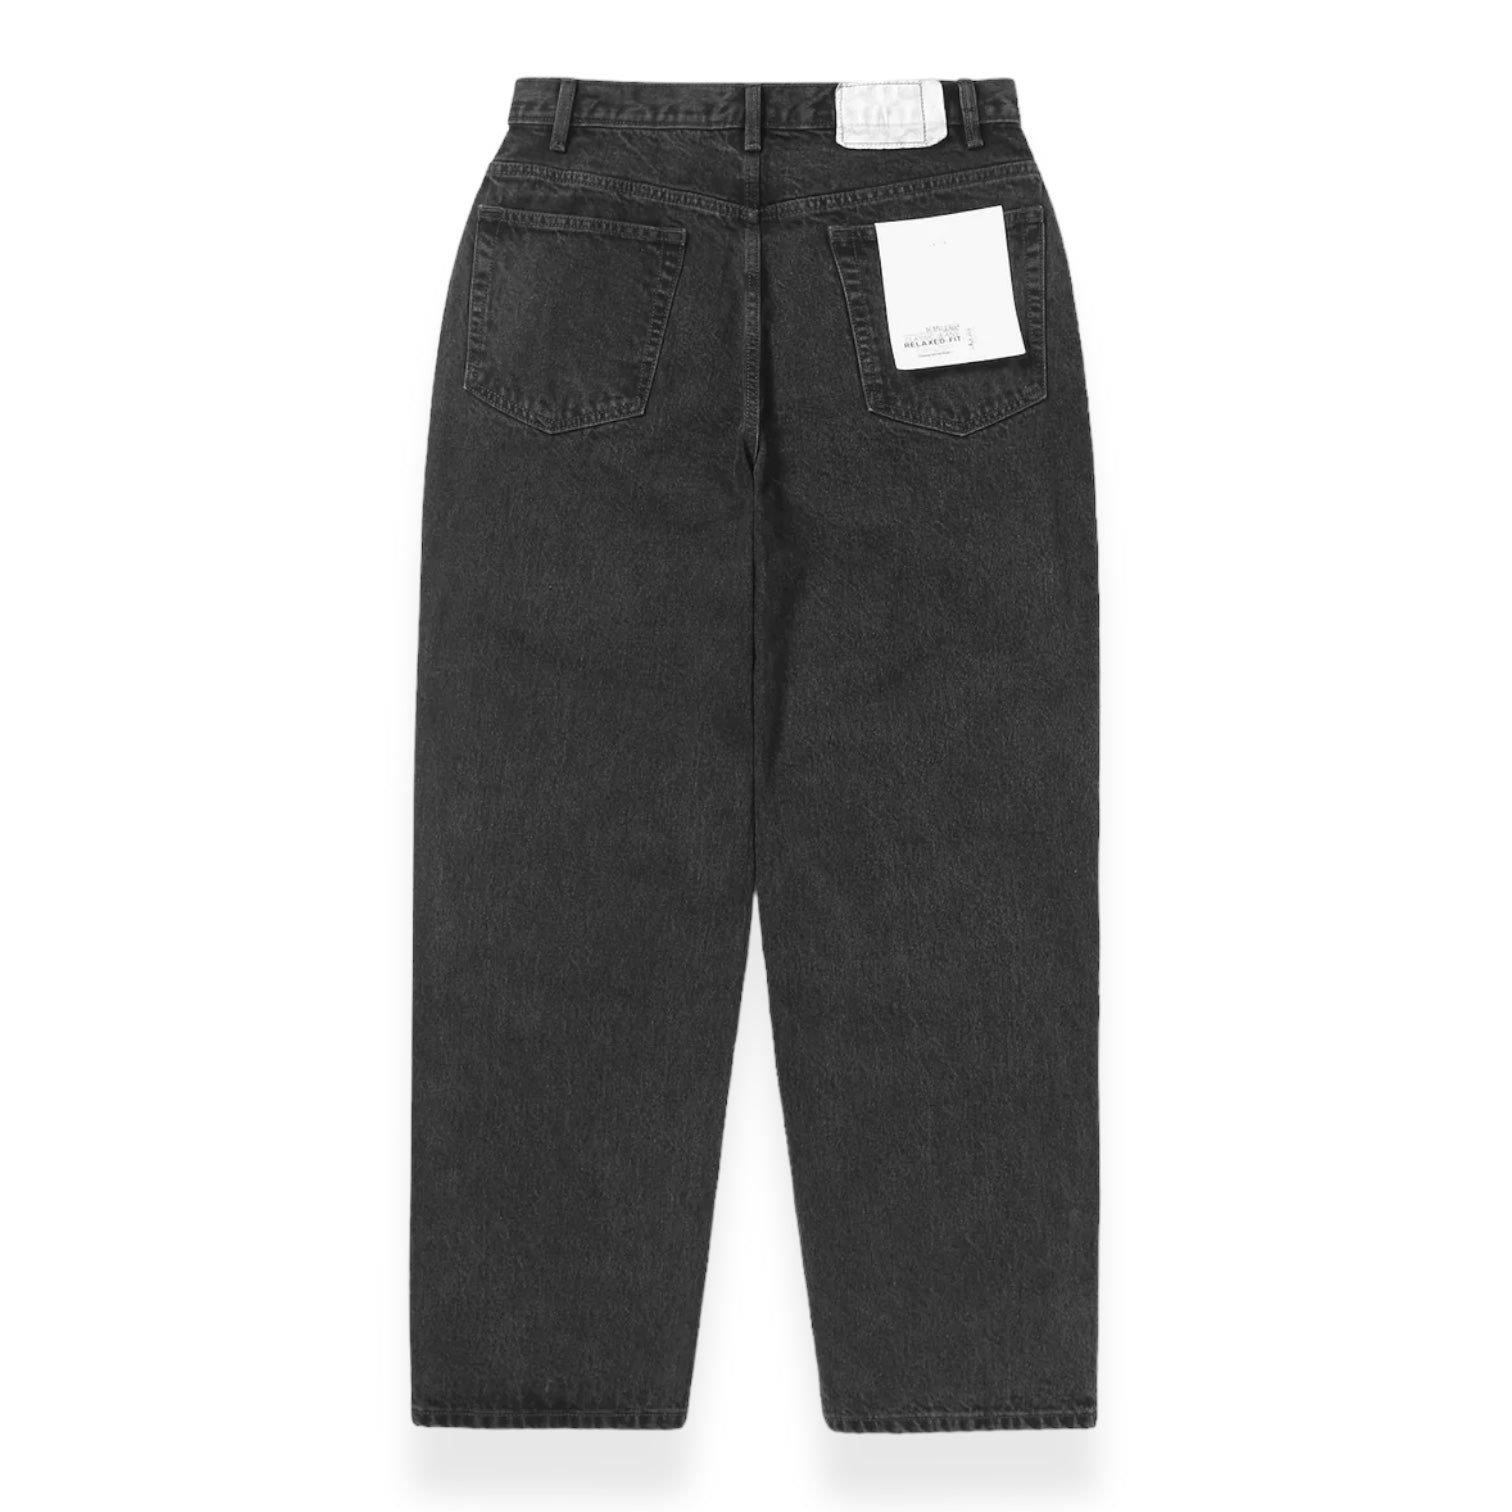 Thisisneverthat - Relaxed Jeans (Black)